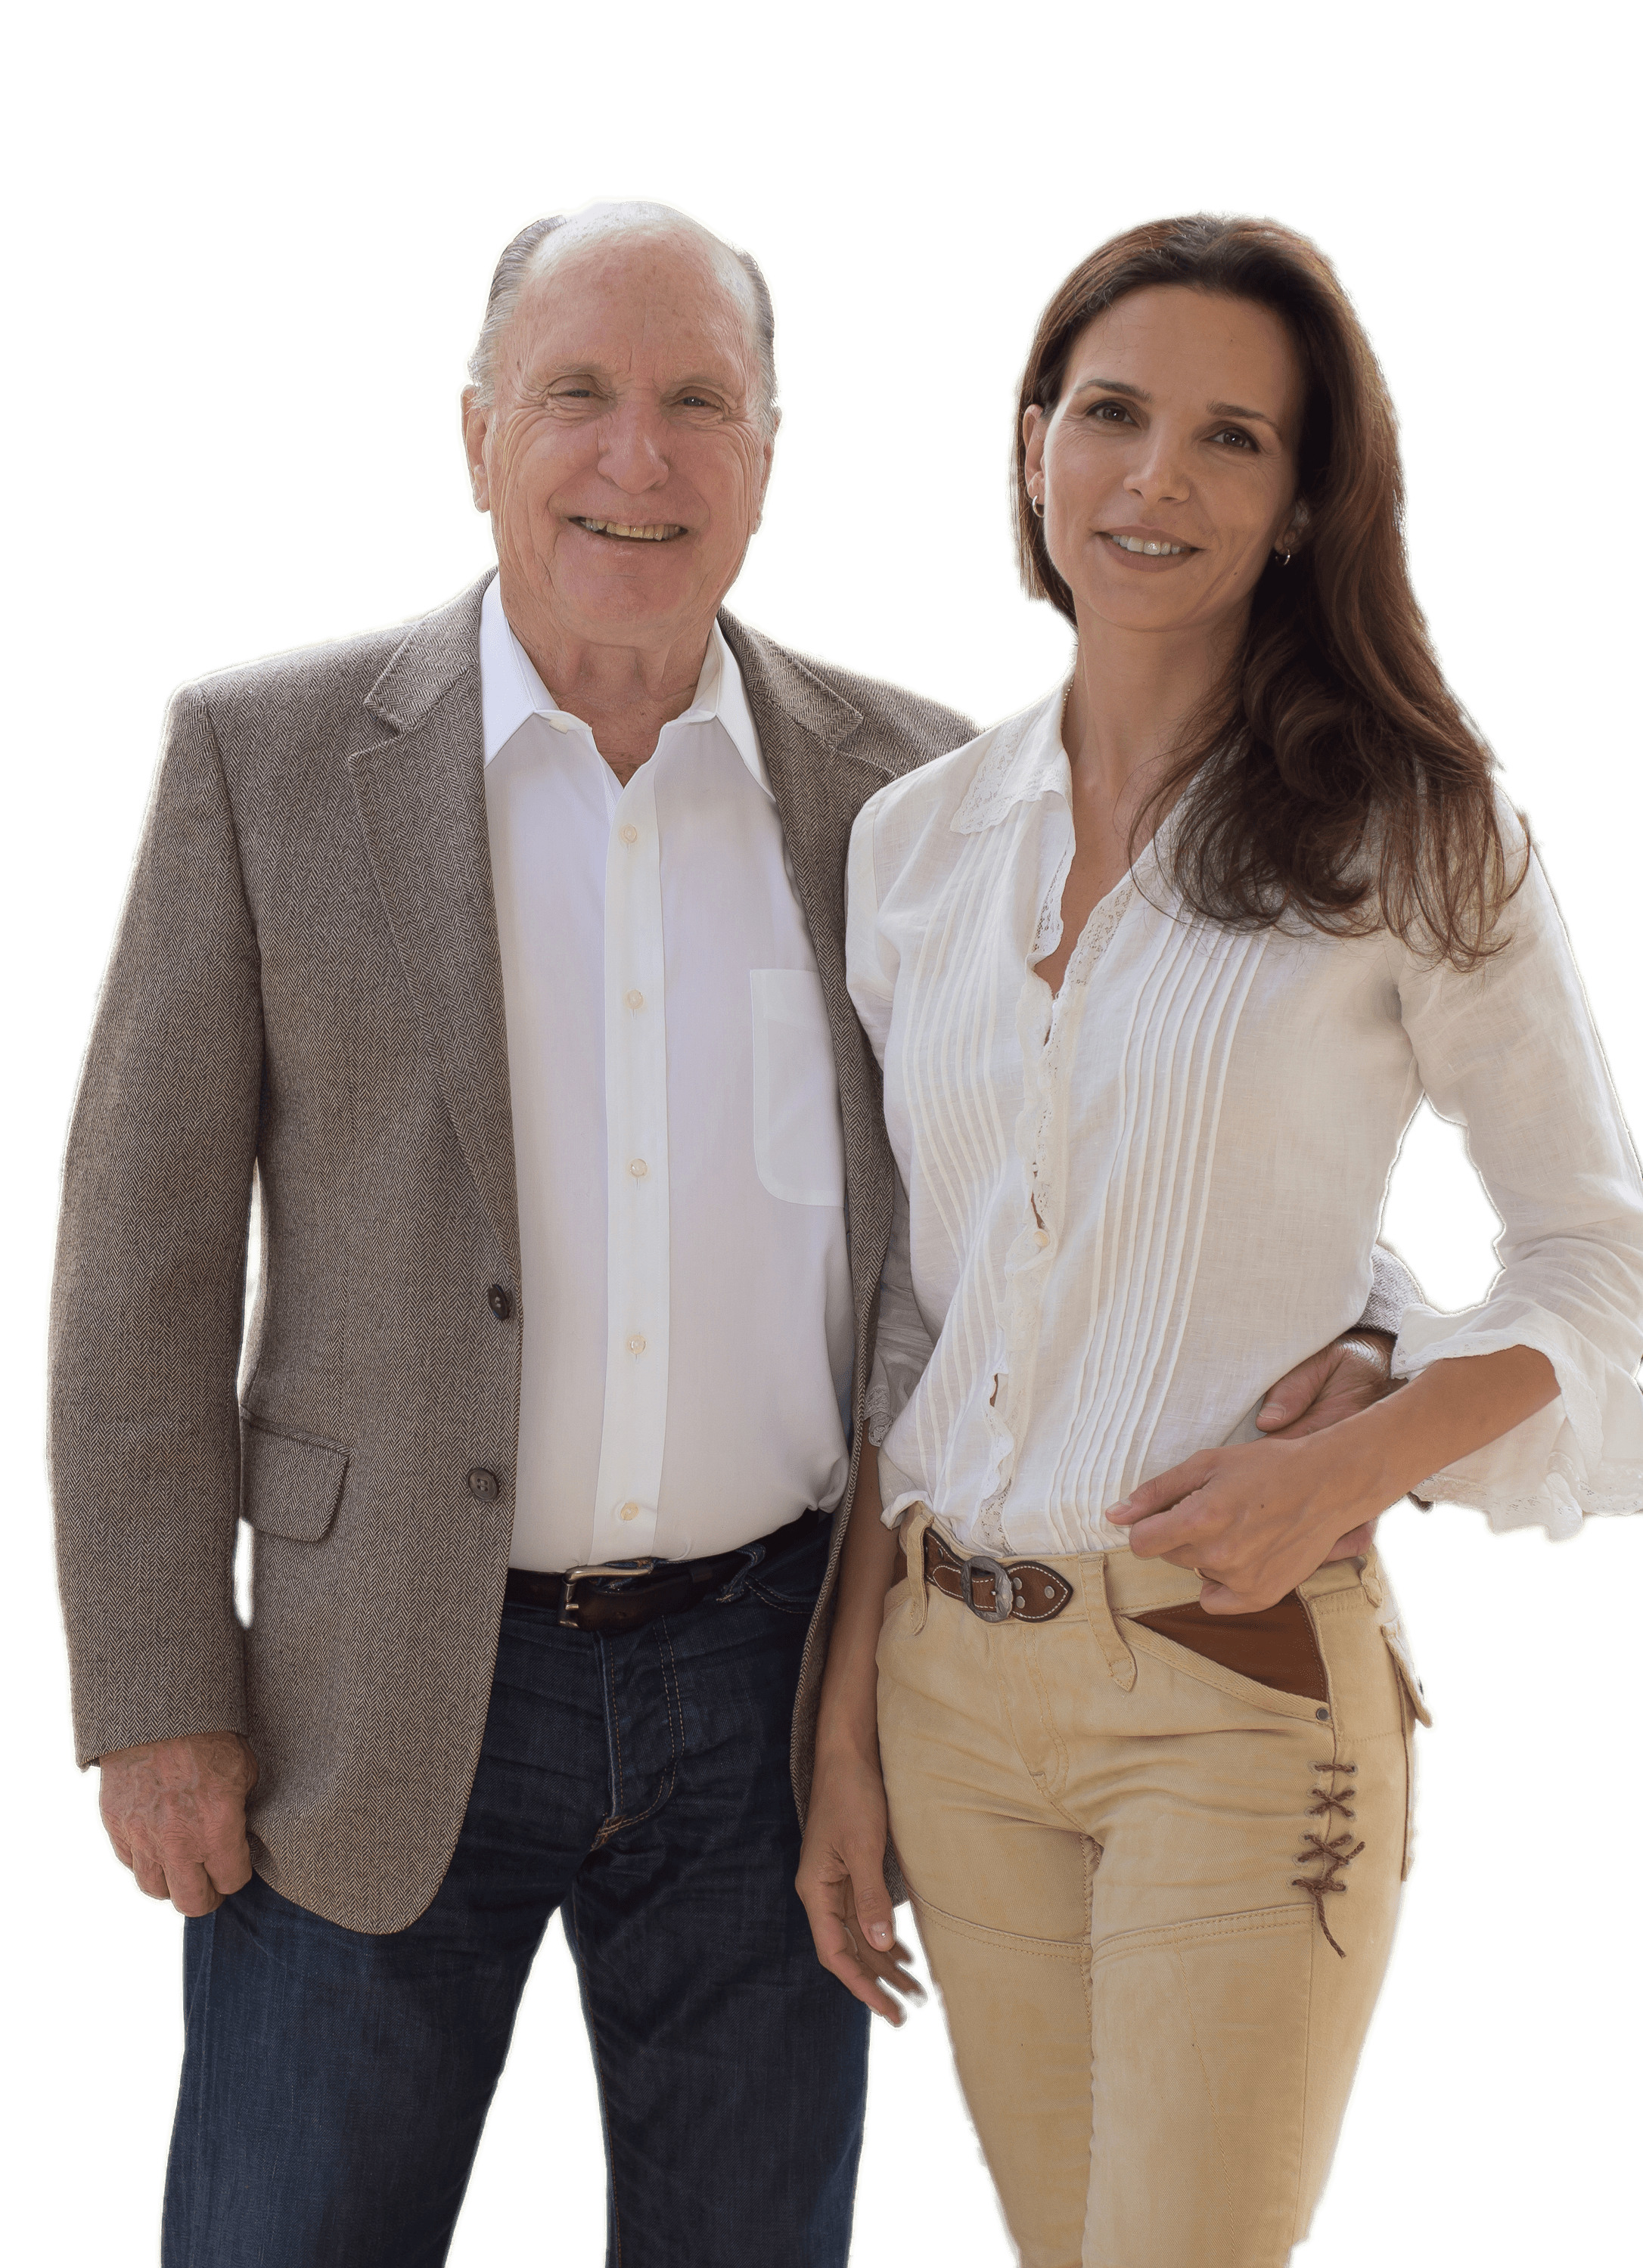 Robert Duvall With His Wife Luciana Pedraza png icons